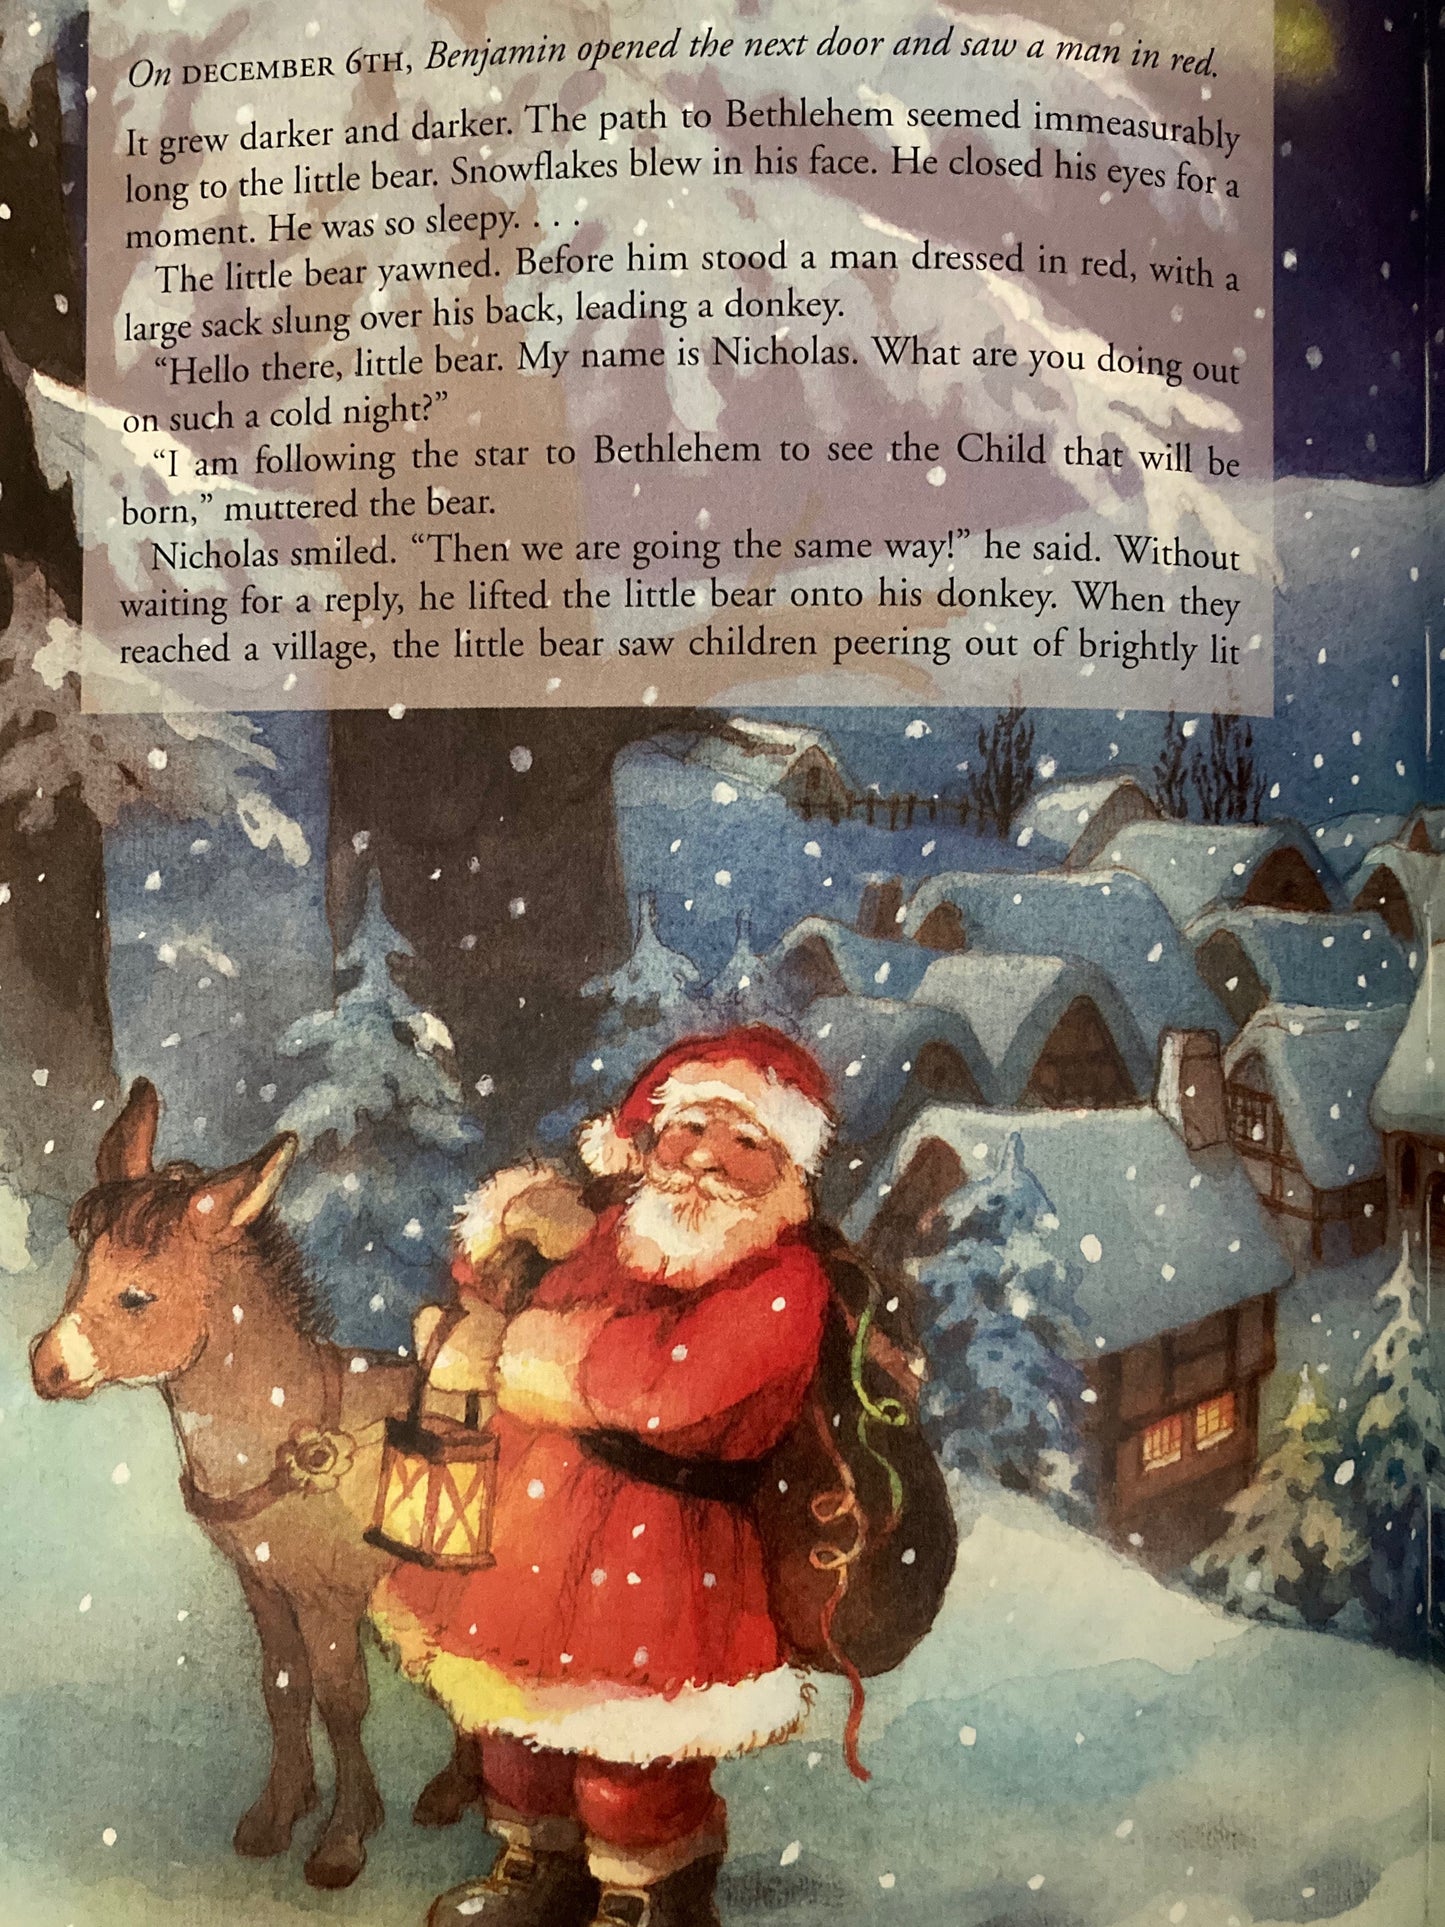 Children's Picture Book - ADVENT STORYBOOK